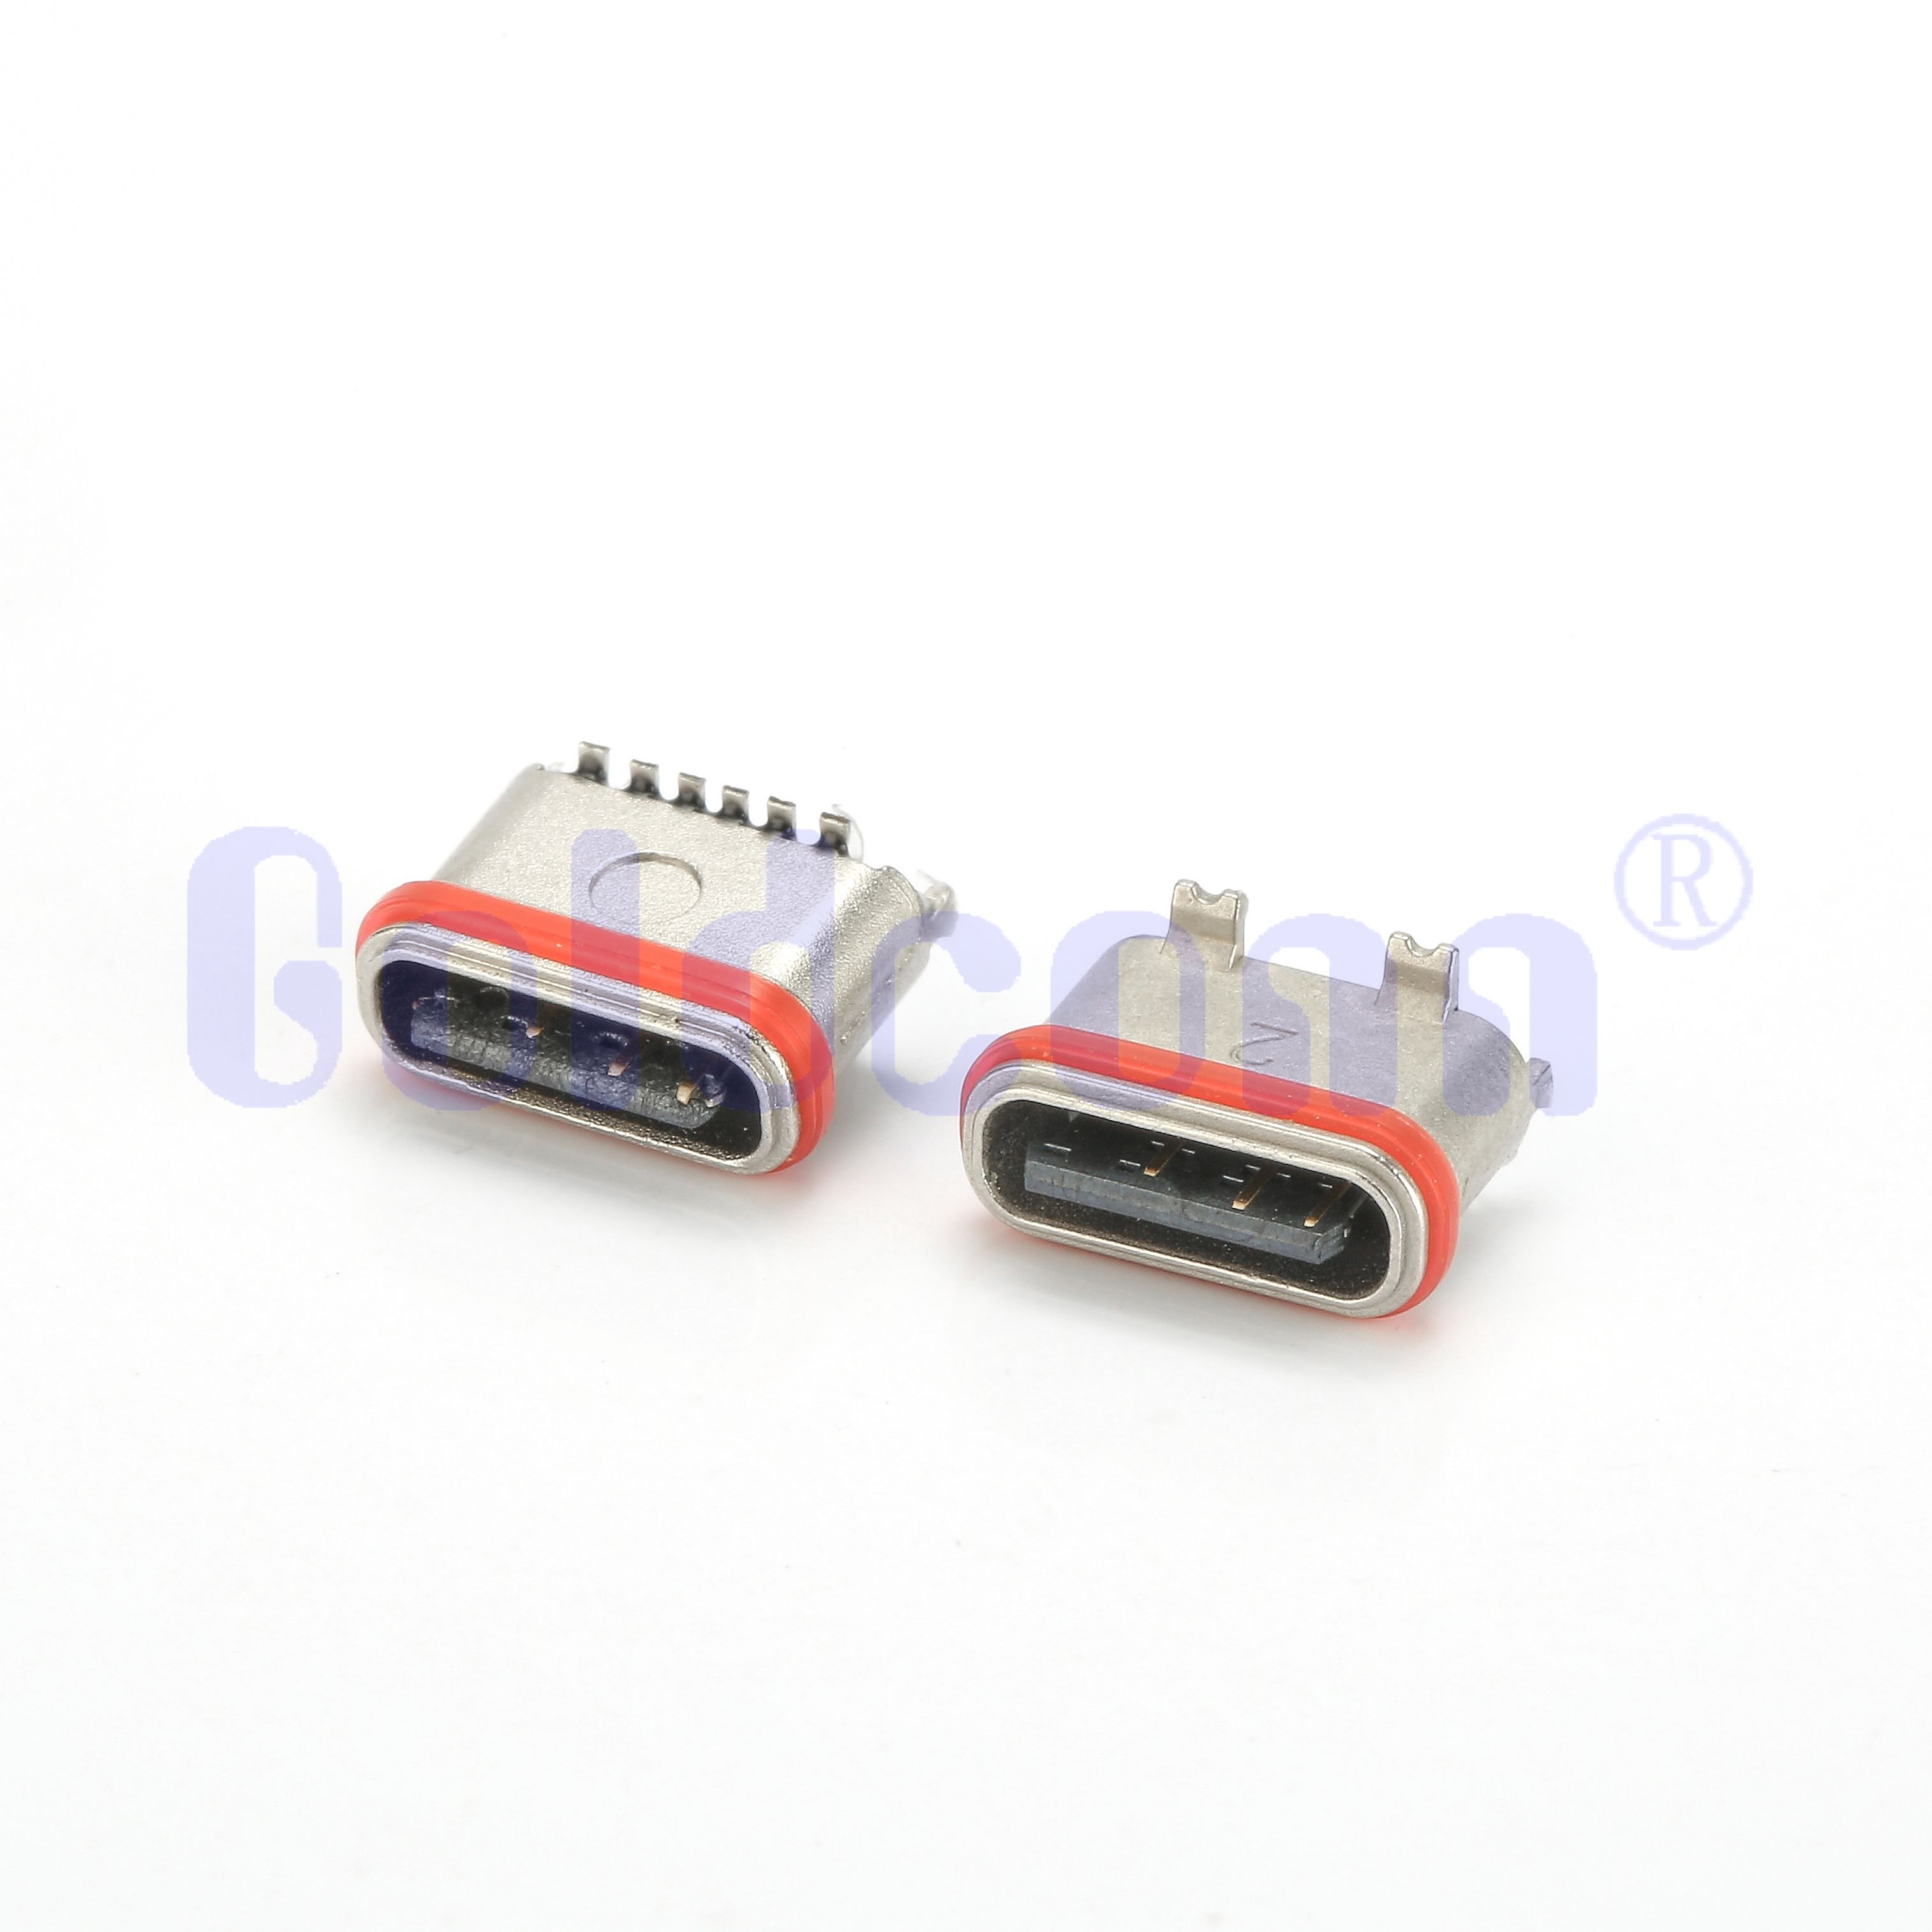 CF197-06TCB01R-22 TIPO C USB 6PIN Conector femenino impermeable, tipo vertical SMT